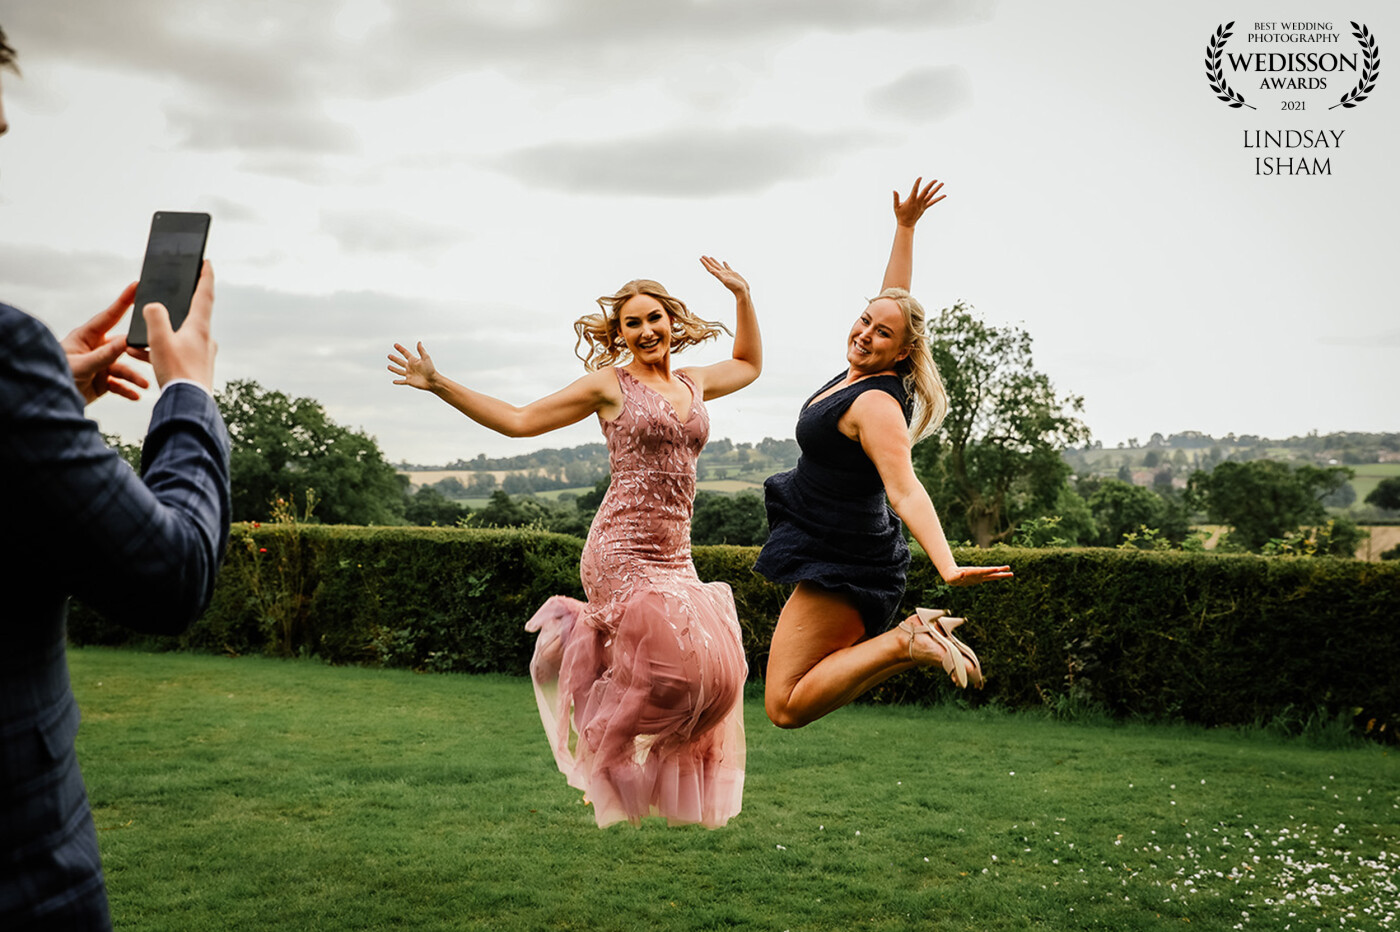 These two!  Sam & Simon's wedding at Shottle Hall back in August was such a fabulous day... and with fun guests too!  They were determined to get the "jumping shot" and fortunately, I didn't miss it!